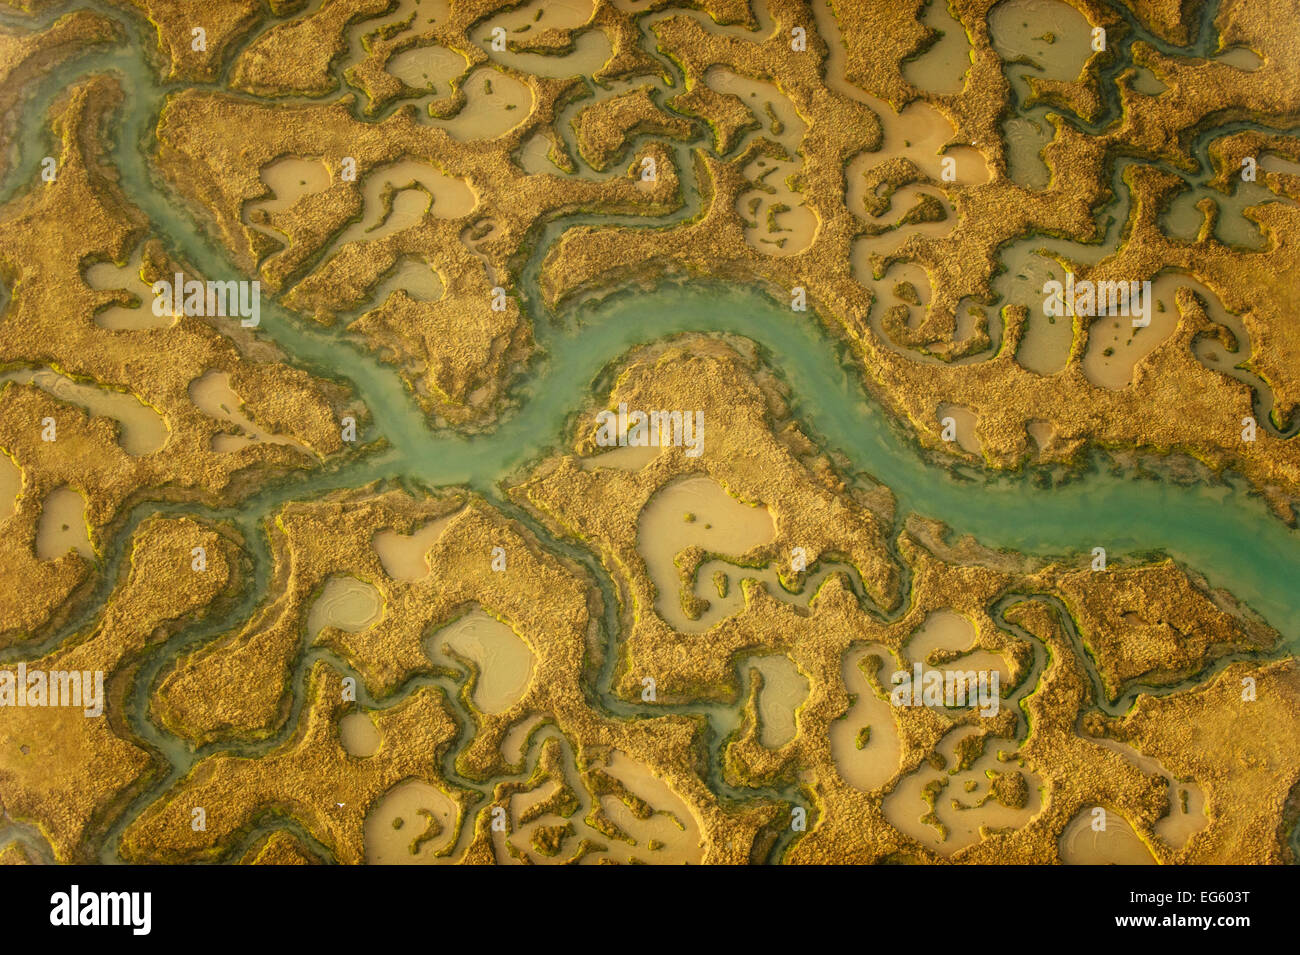 View of saltmarsh habitat from the air, showing tidal creek system, Abbotts Hall Farm, Essex, England, UK, March. 2020VISION Book Plate. Stock Photo